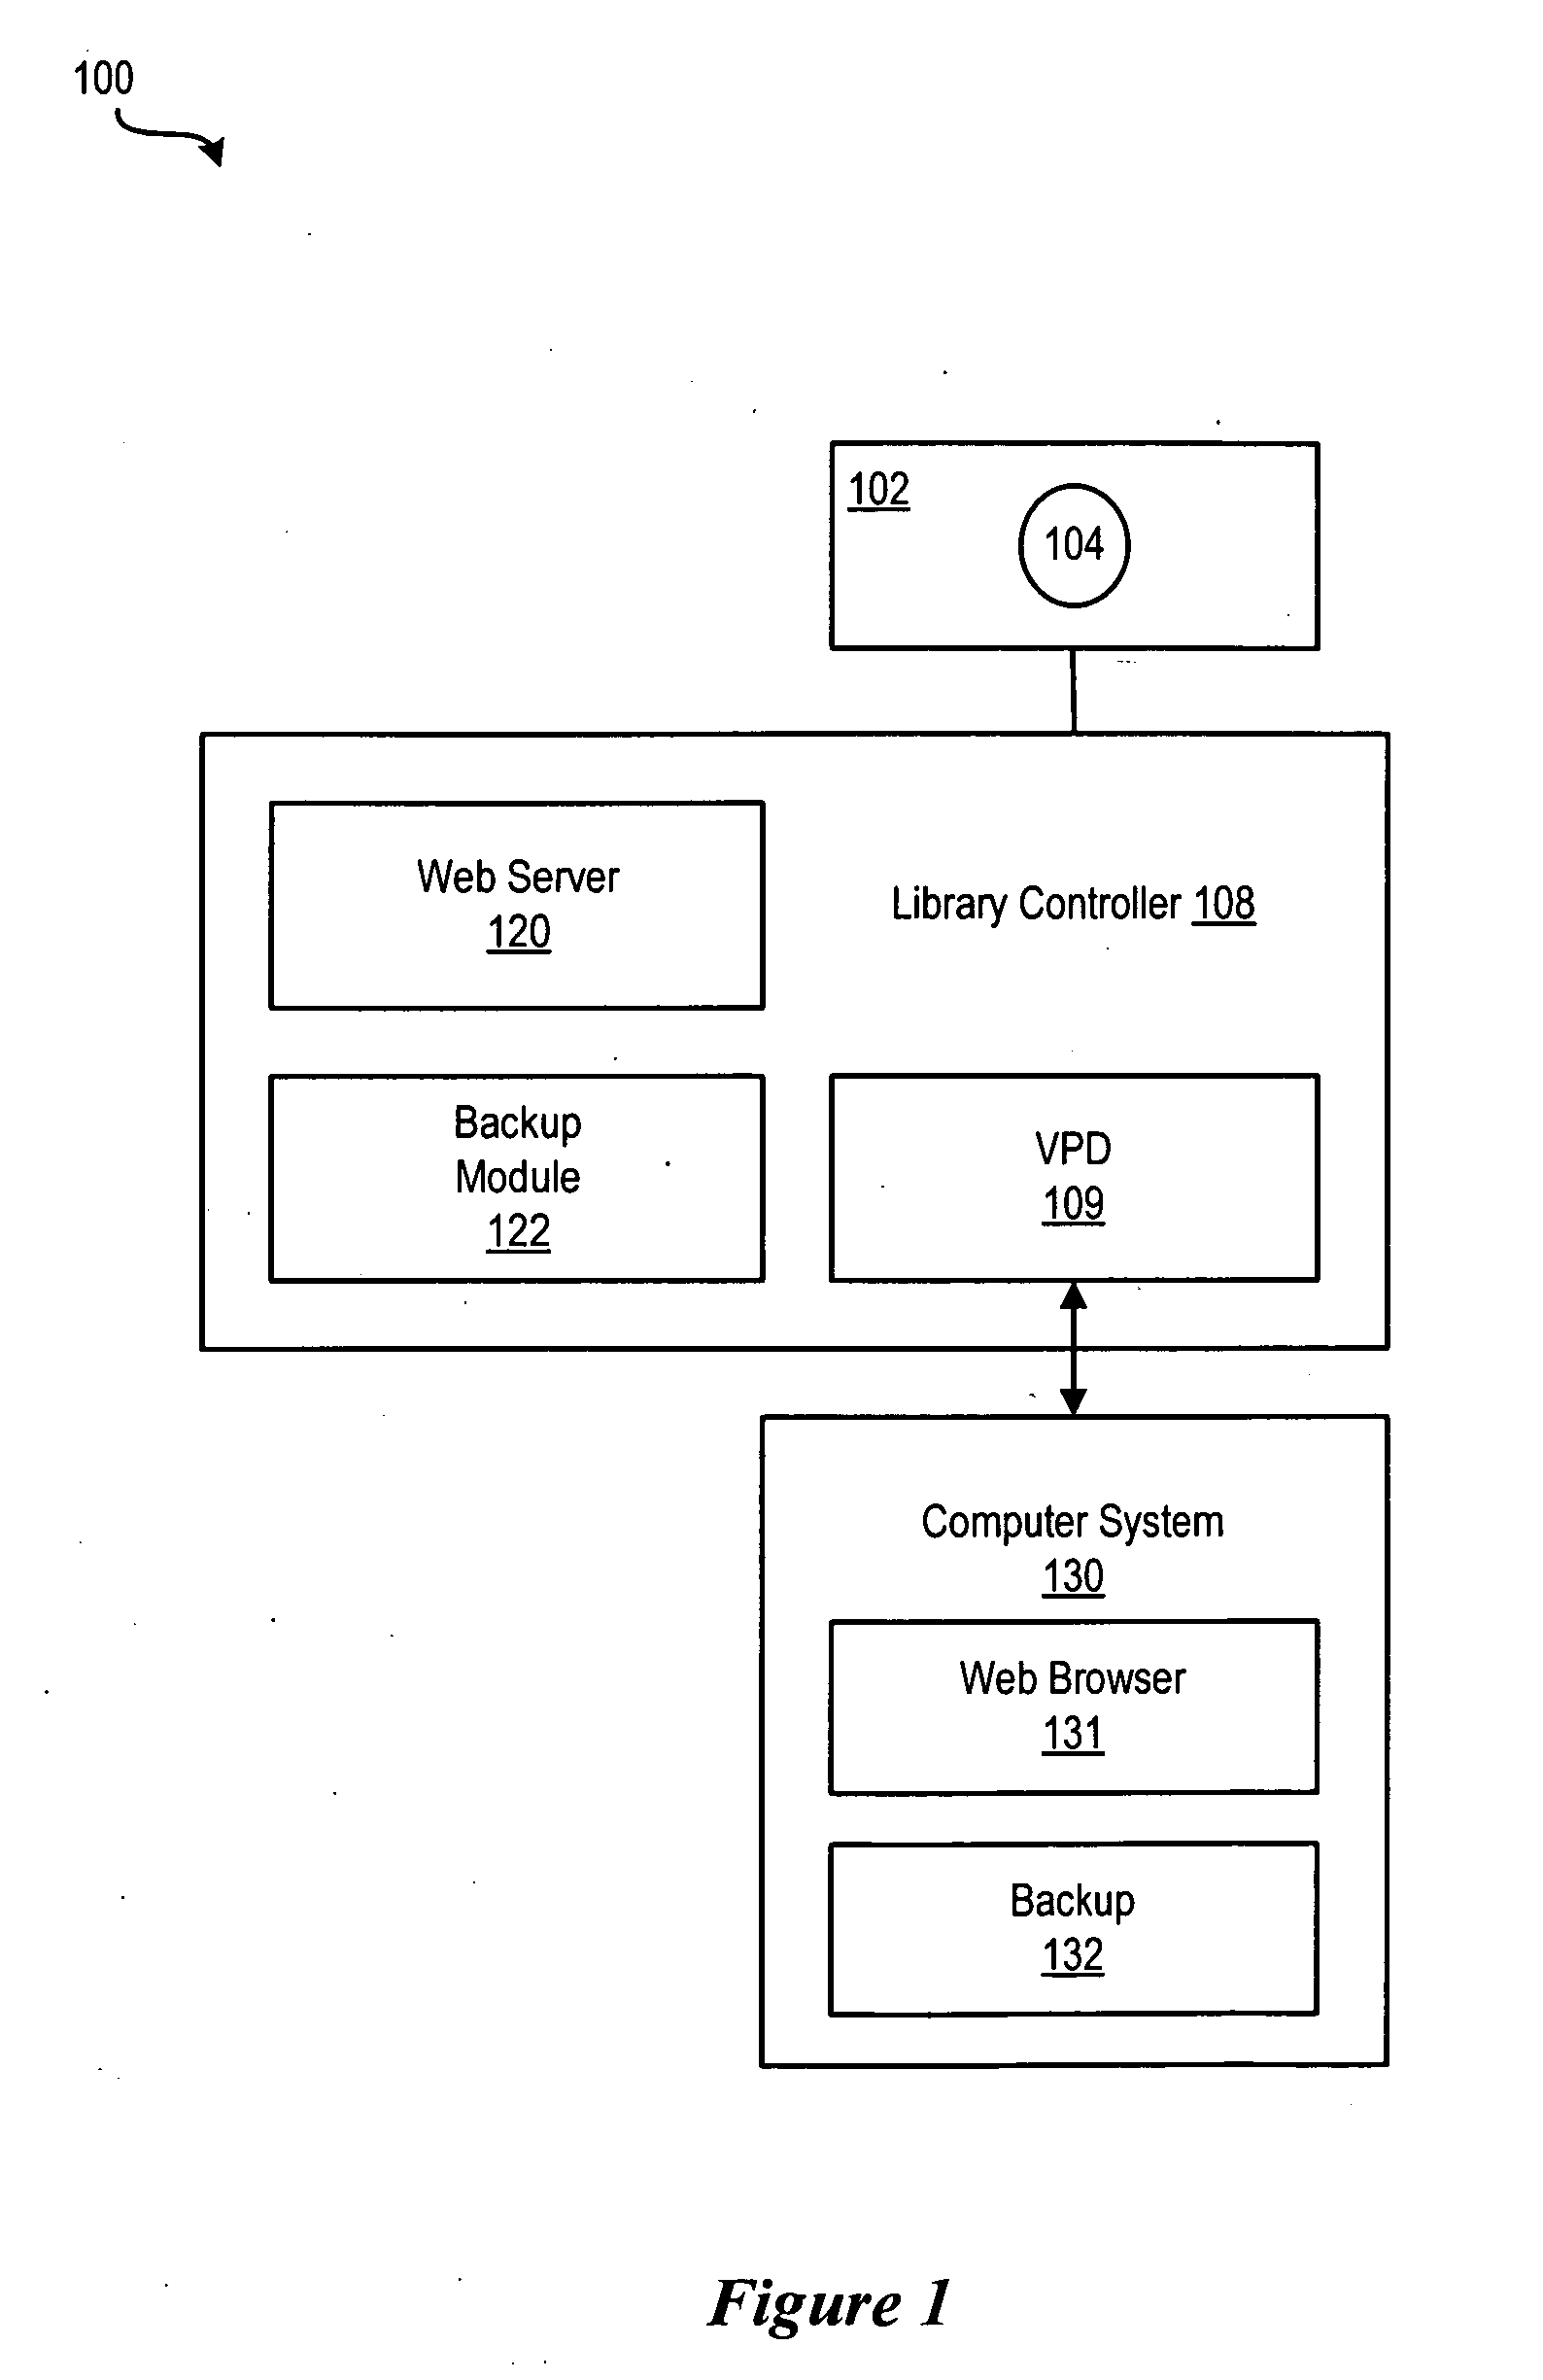 Method of Backing Up Library Virtual Private Database Using a Web Browser